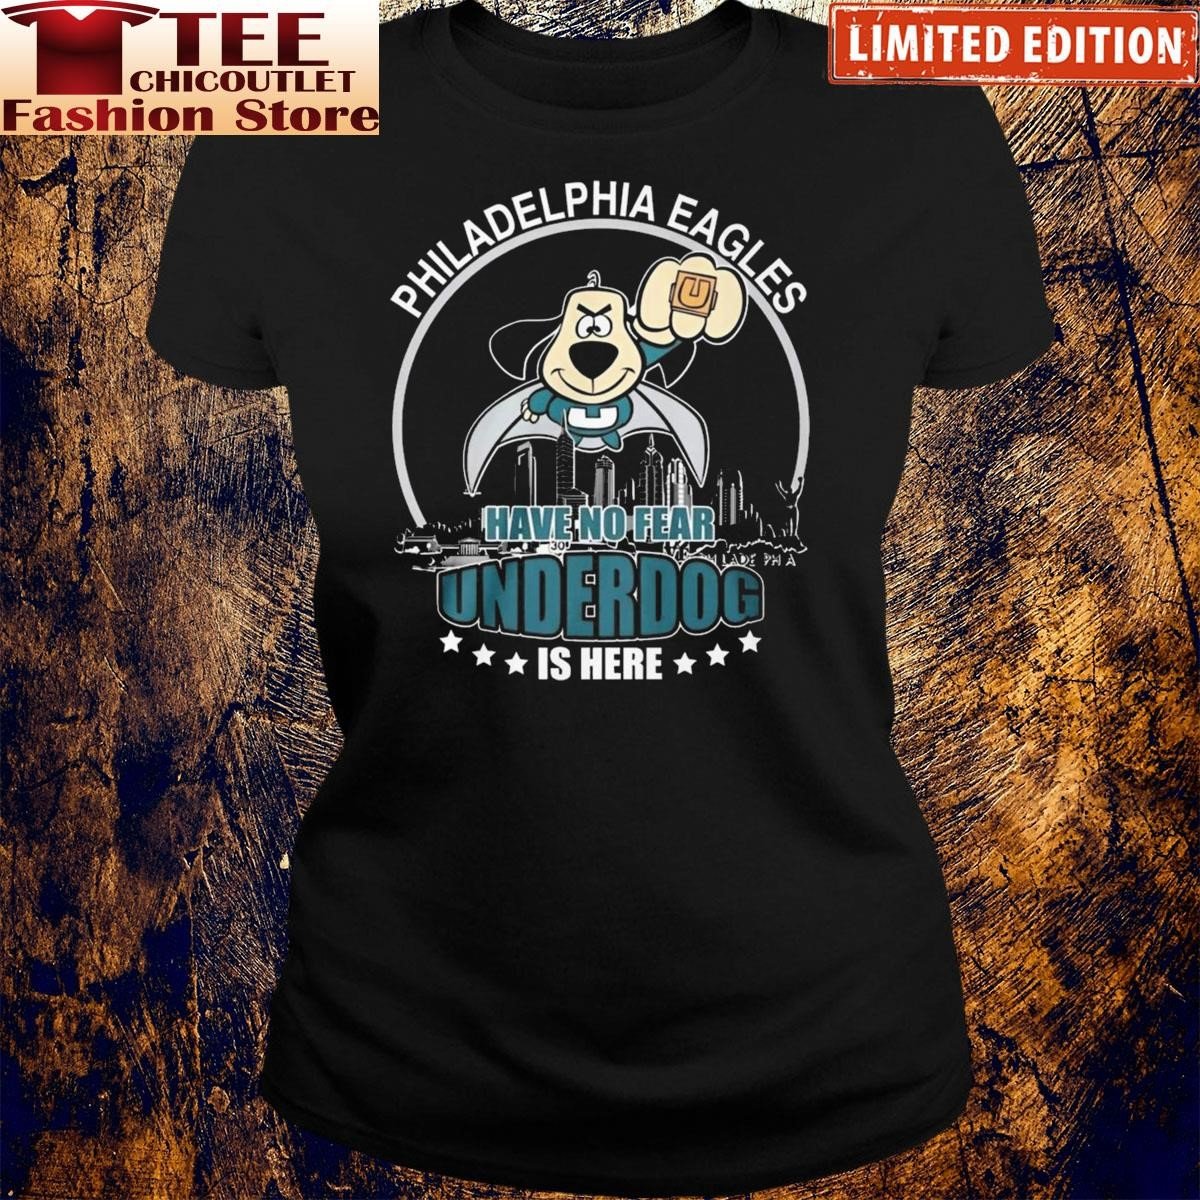 Teechi Coutlet on X: Philadelphia Eagles Have No Fear Underdog I Here T- Shirt   / X